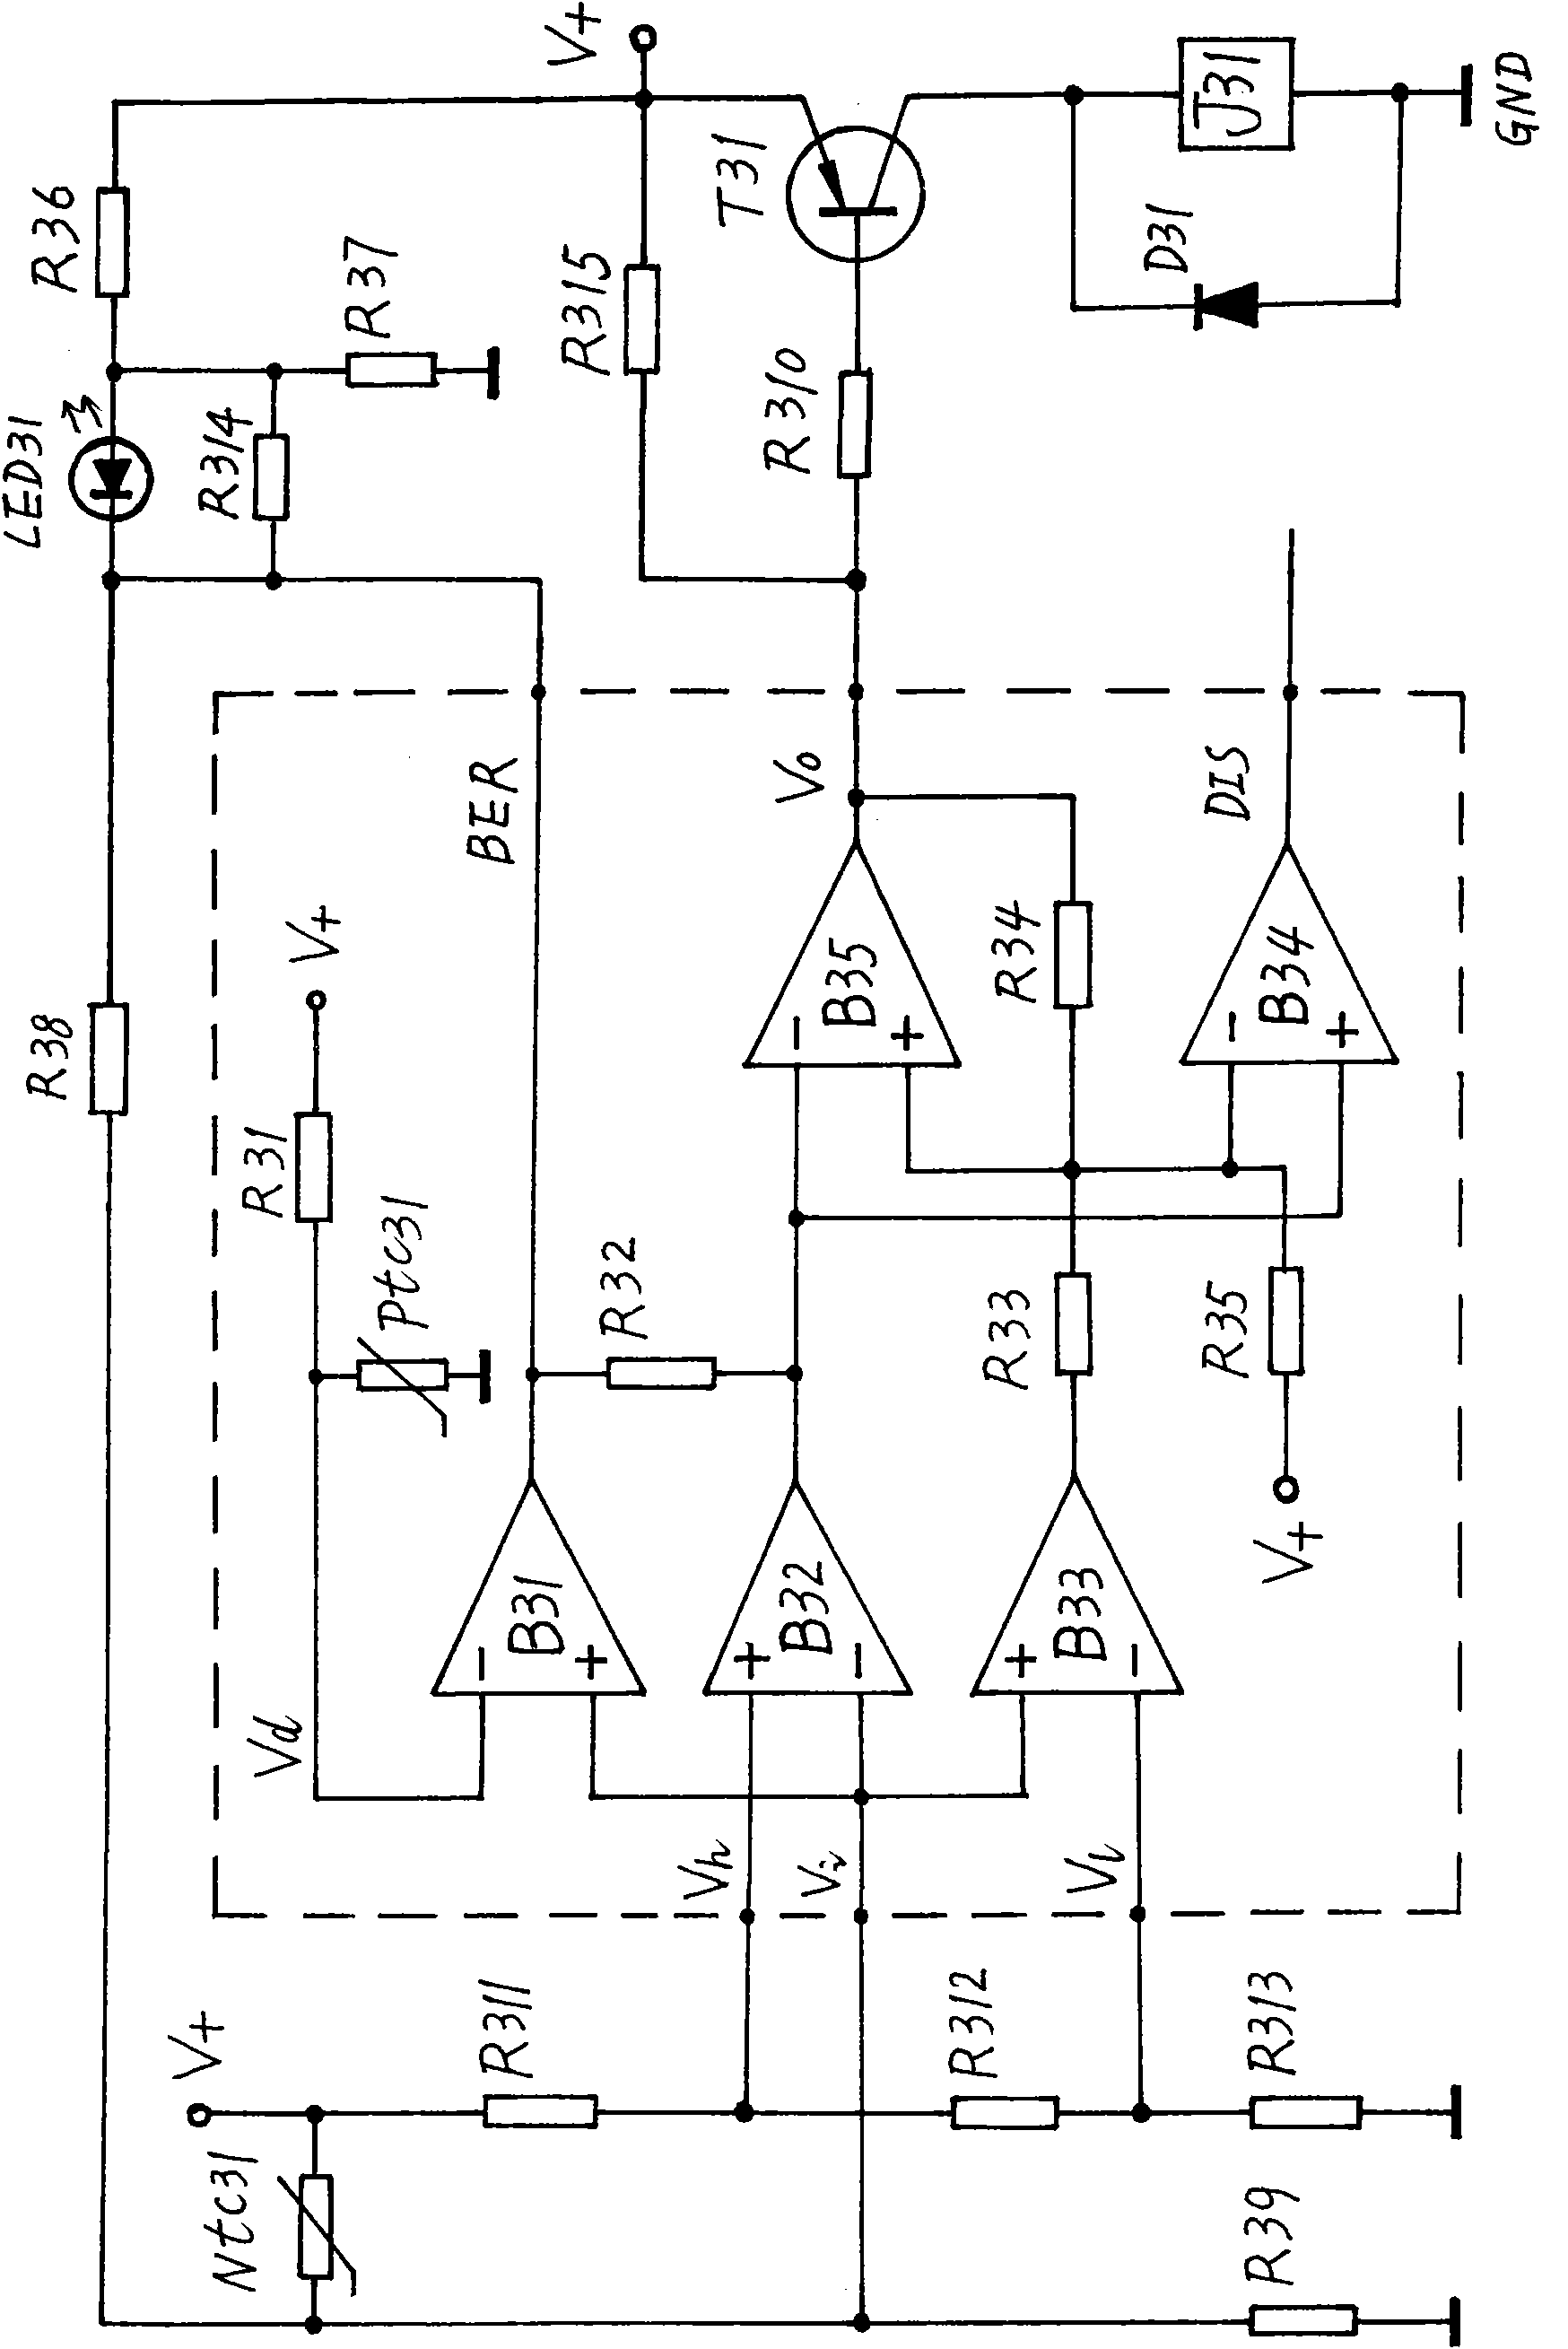 Lower-than-lower-limit reverse control time base circuit